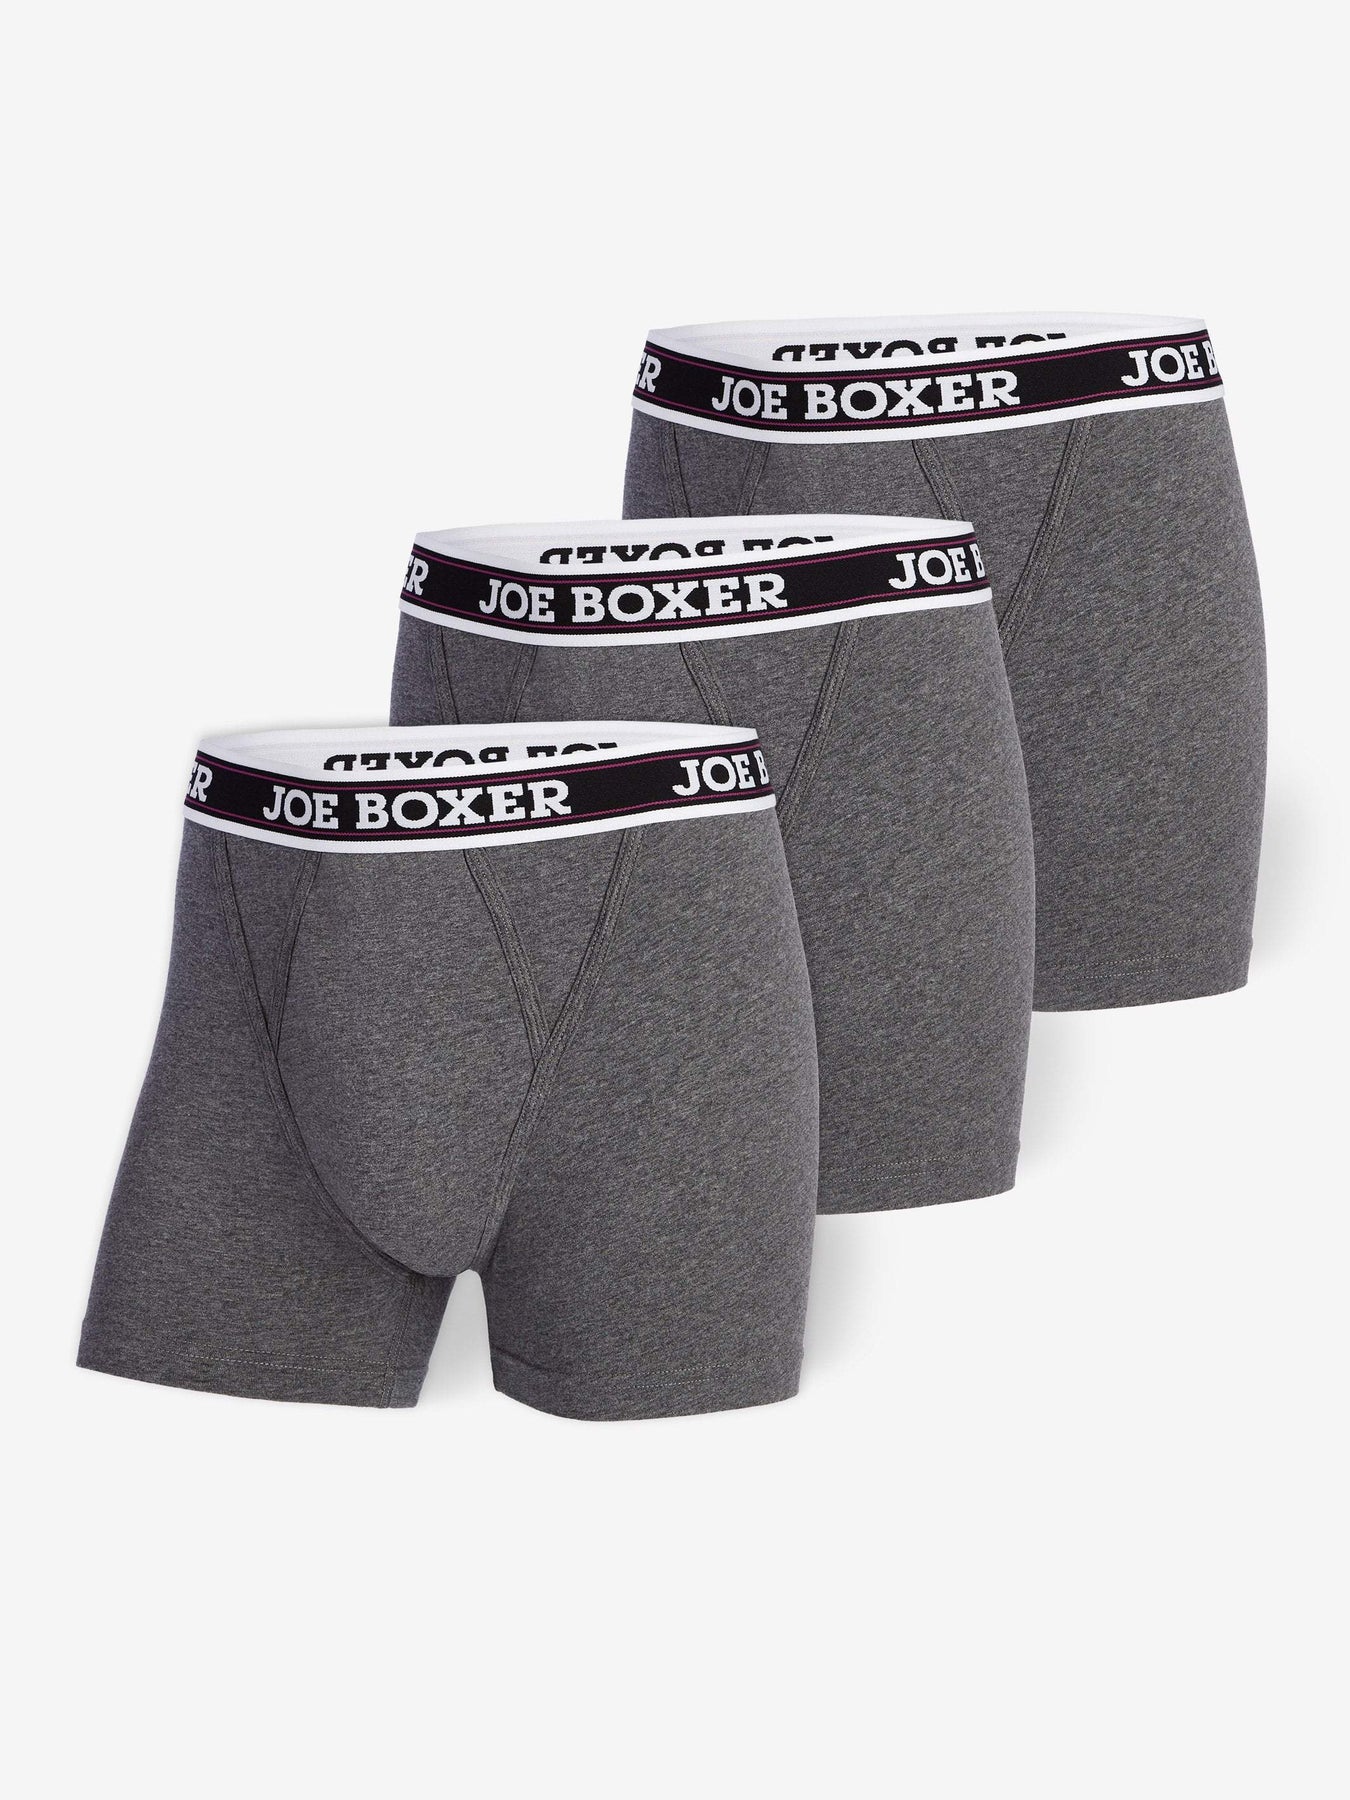 https://cdn.shopify.com/s/files/1/0175/8822/products/BOXER_FITTED_MODERN_STRETCH_MULTIPACKS_PACK-OF-3_OFF_GREY_1800x1800.jpg?v=1627067131